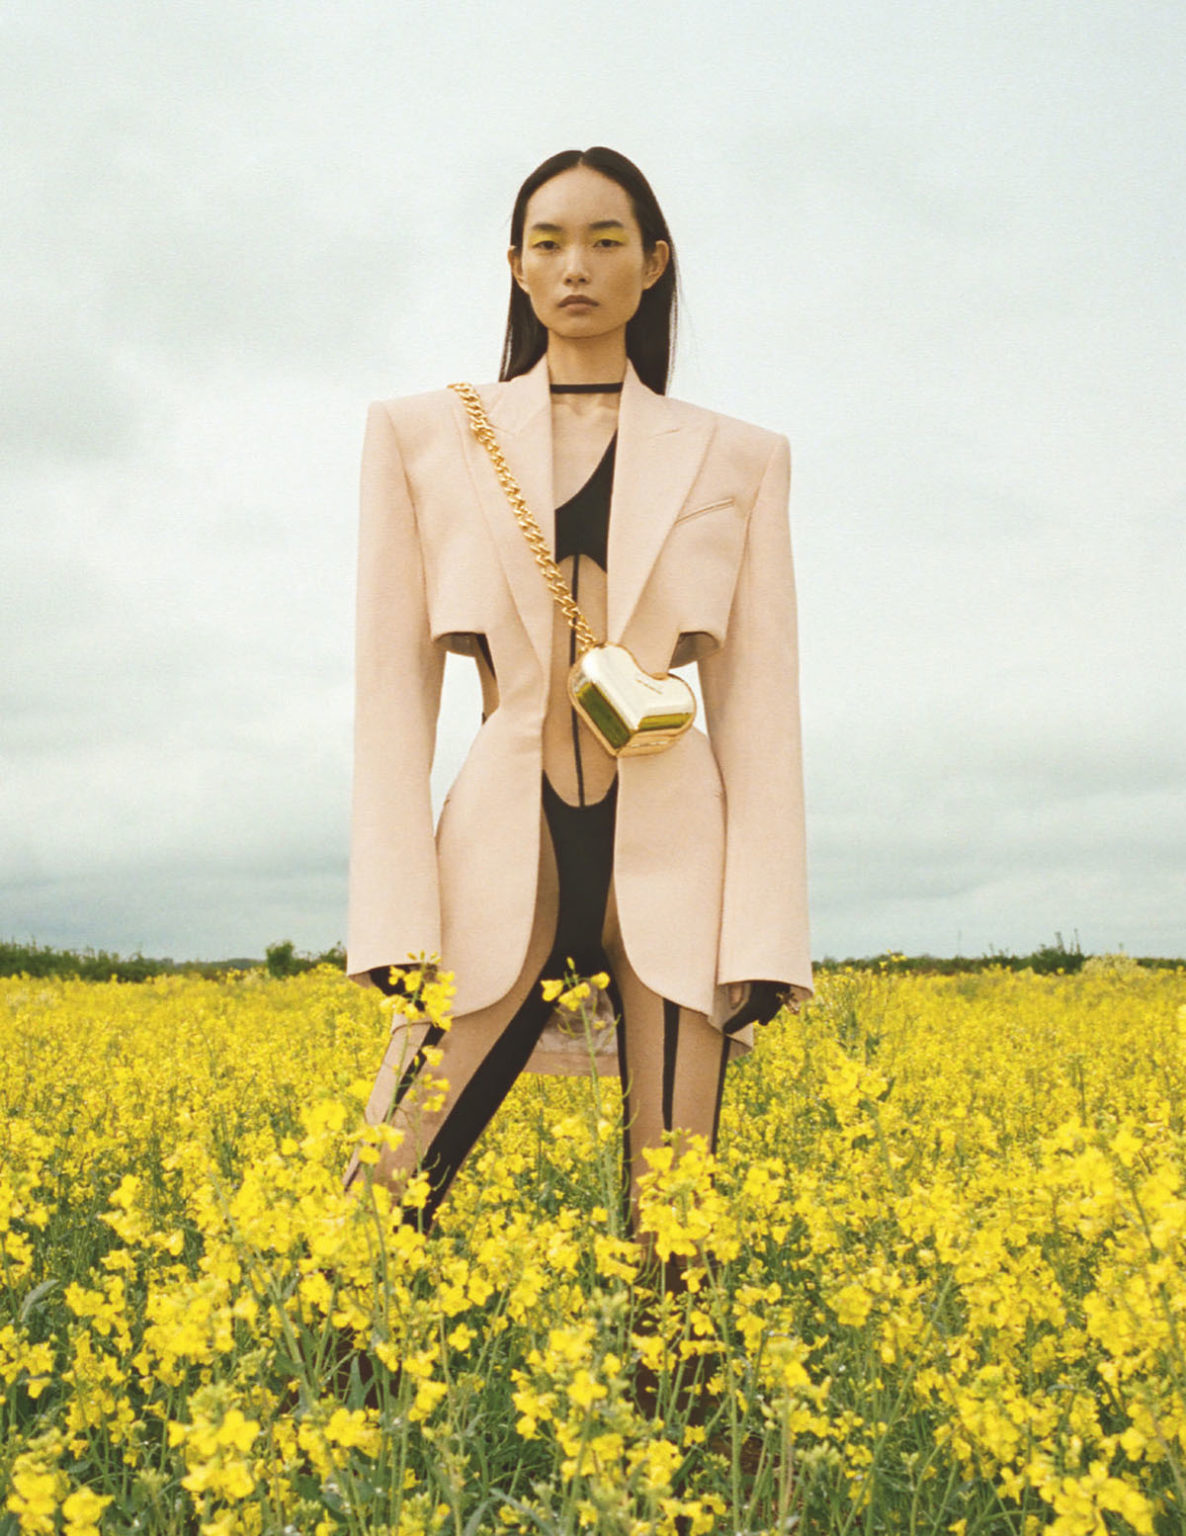 Ling Chen by John-Paul Pietrus for Vogue Singapore July/August 2021 ...